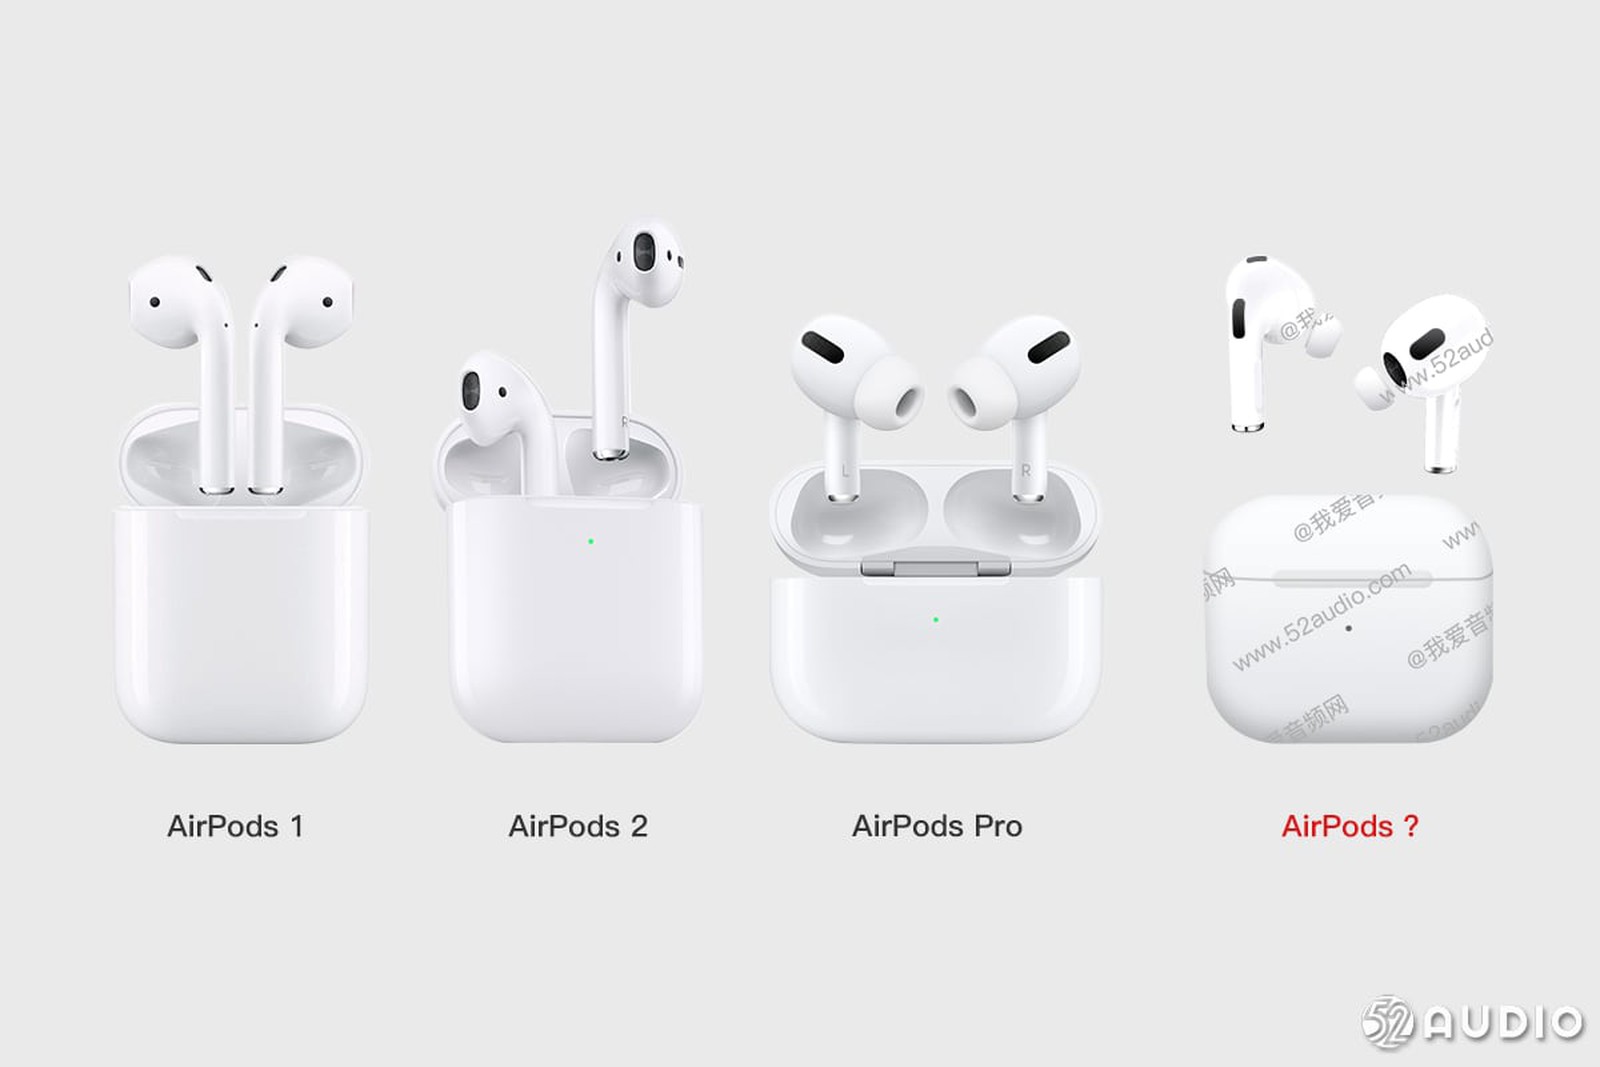 New AirPods Expected Later This Year as Suppliers Begin Component Shipments - MacRumors